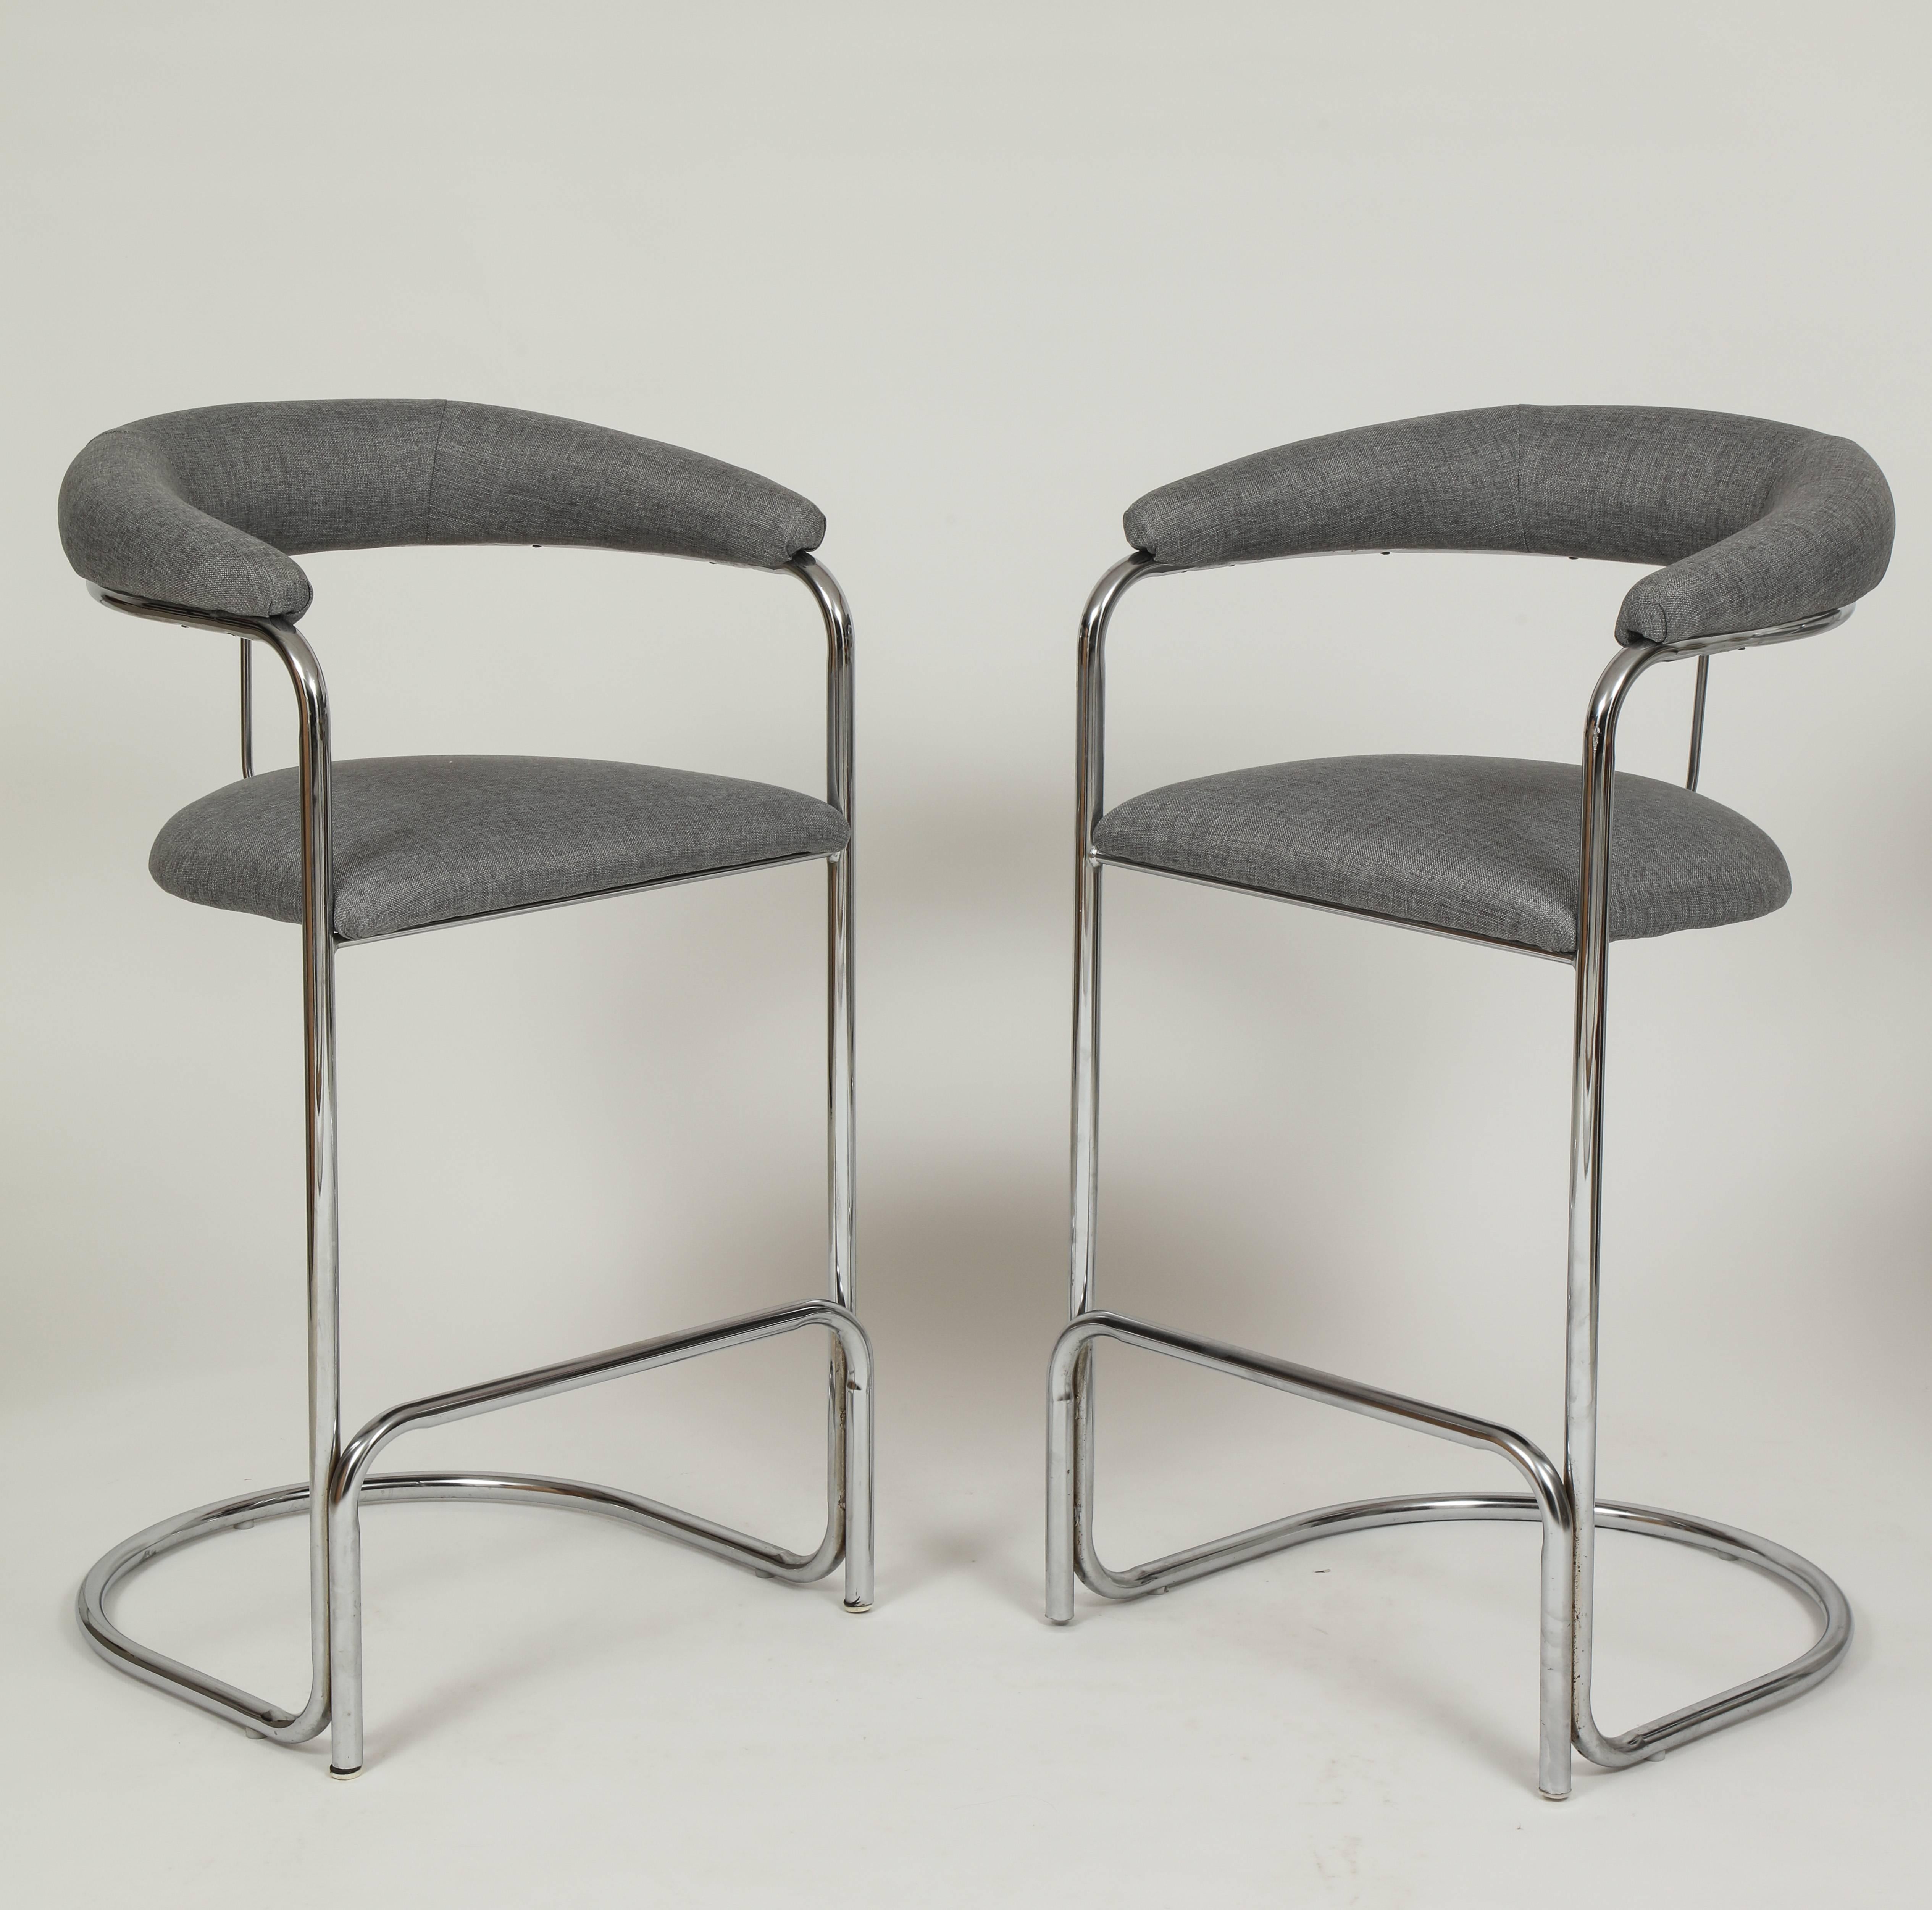 Vintage grey wool thonet bar stools 1960s mid-century.

Measures: Height: 41 inches,
width: 23 inches,
depth: 20 inches,
seat height: 30 inches.

Thonet today.
The success of the company Thonet GmbH in Frankenberg, Germany, began with the